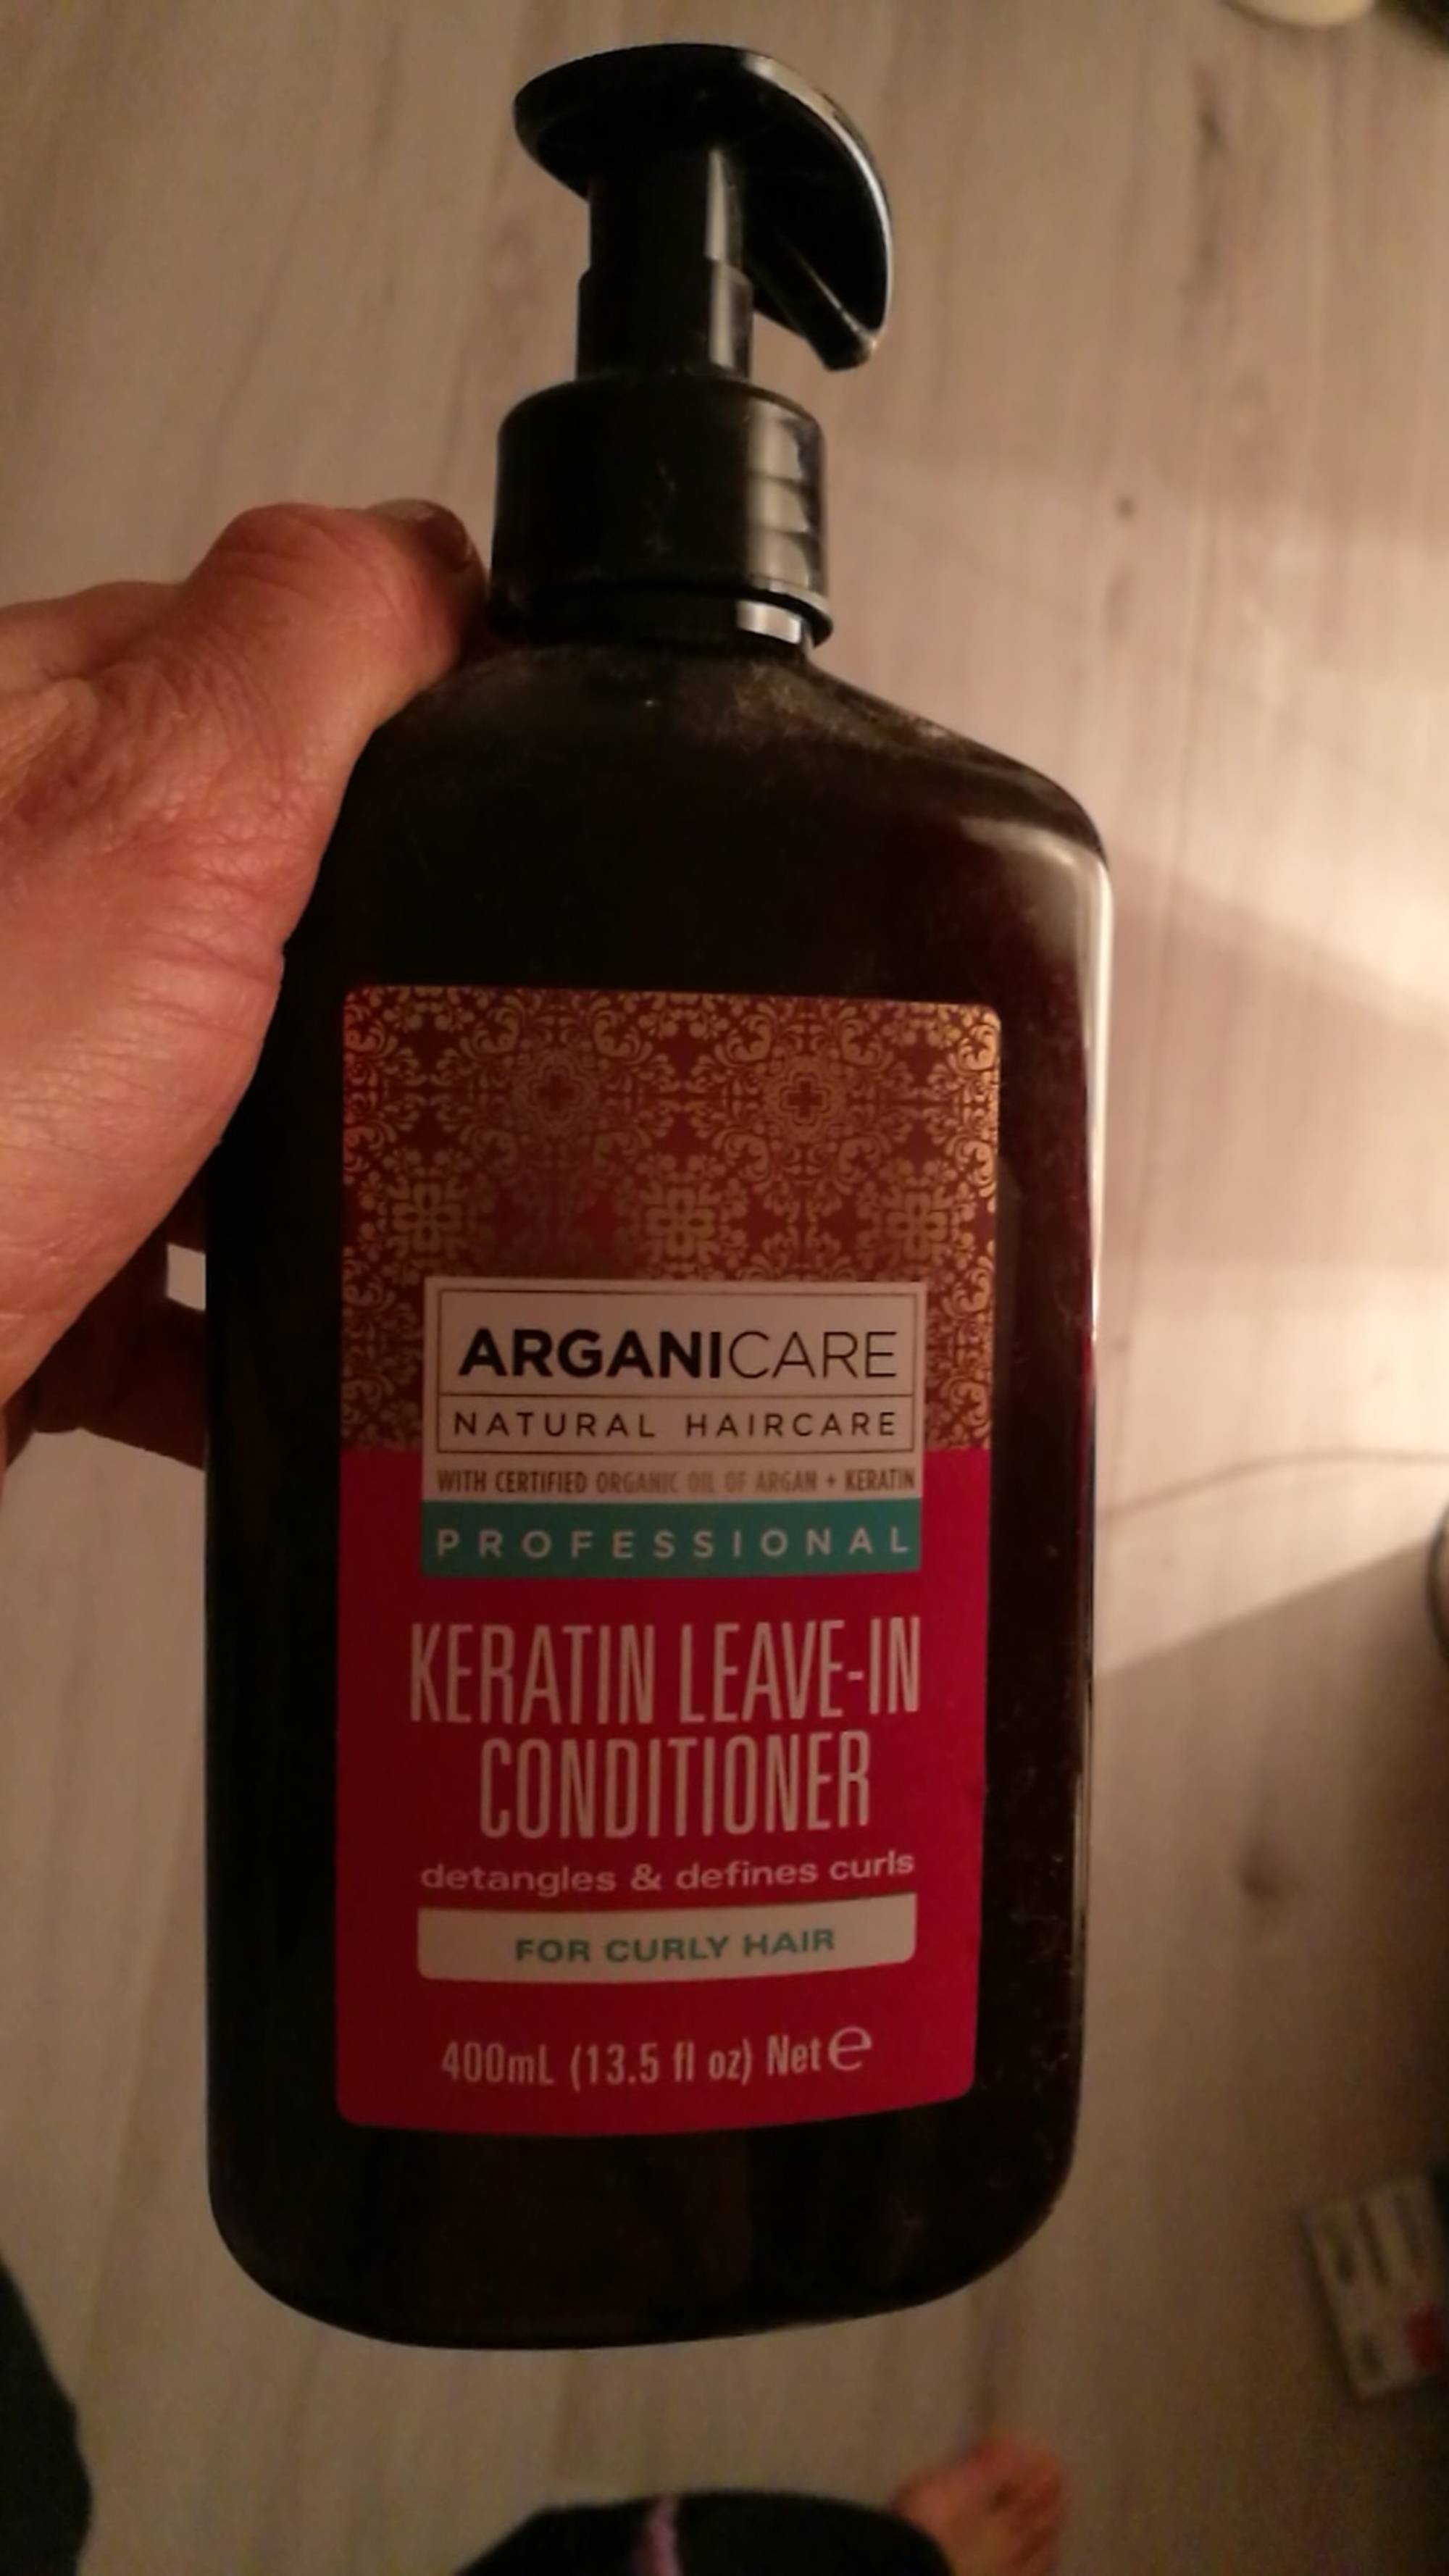 ARGANICARE - Keratin leave-in conditioner for curly hair